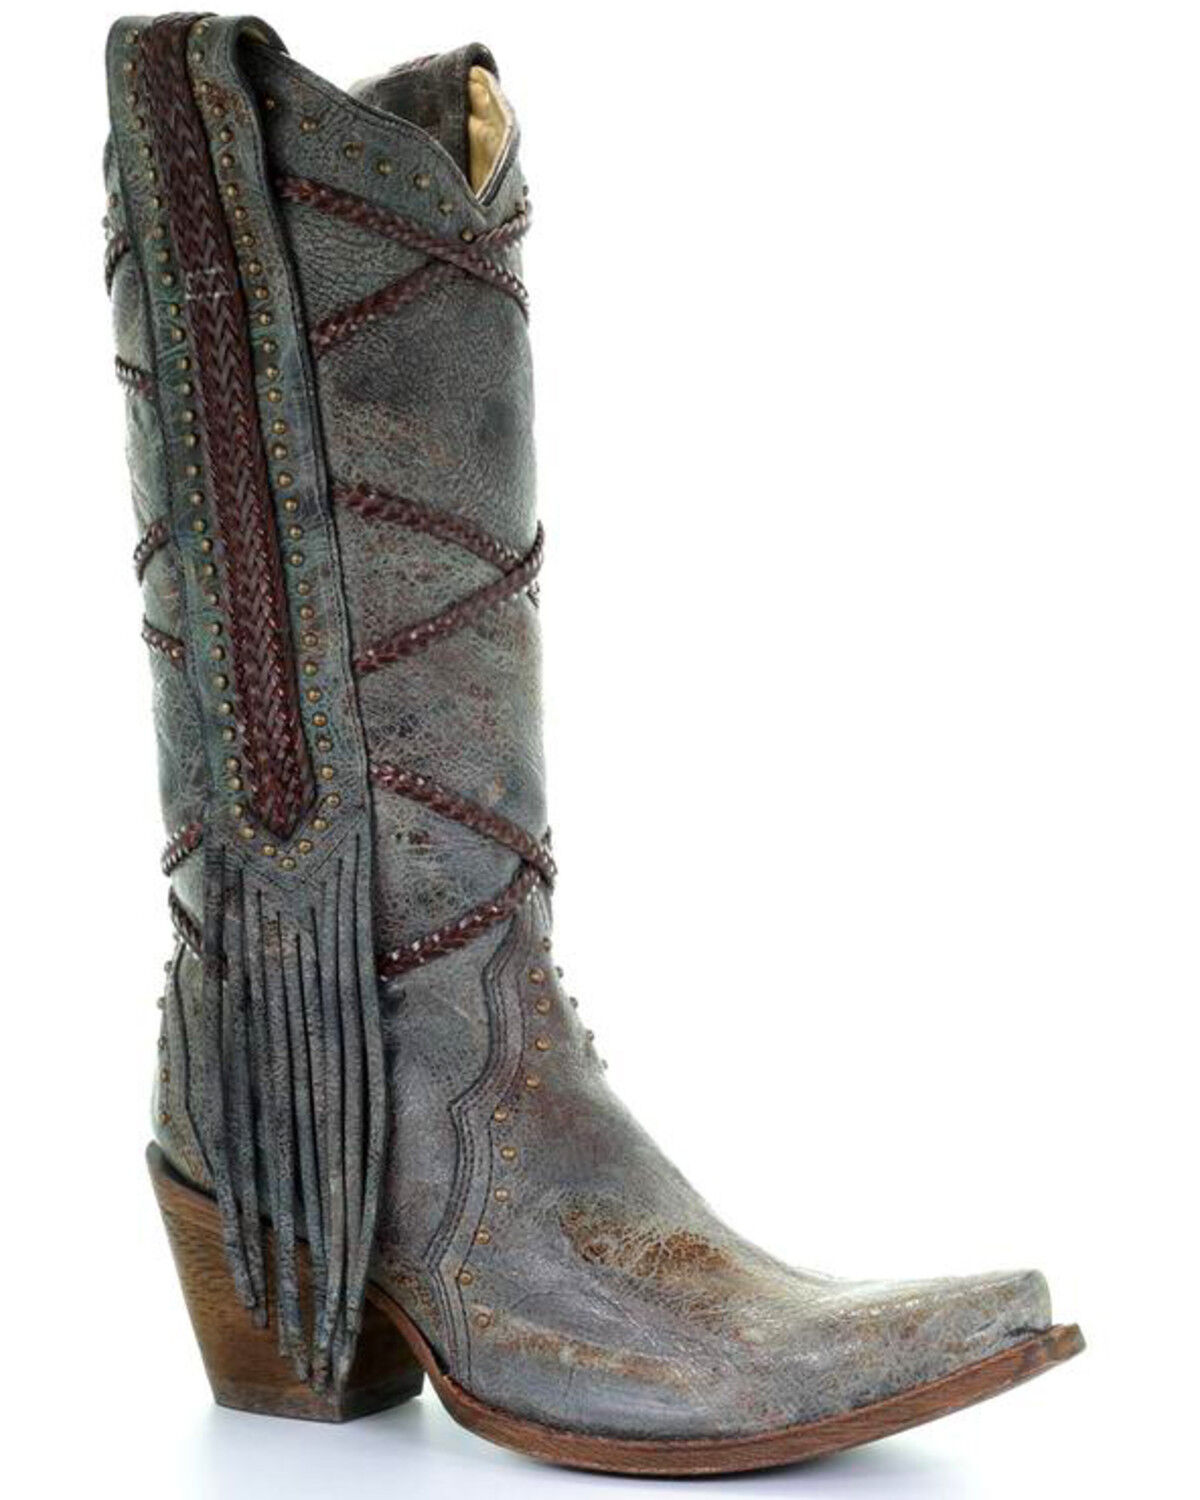 Braided Fringe Cowgirl Boots - Snip Toe 